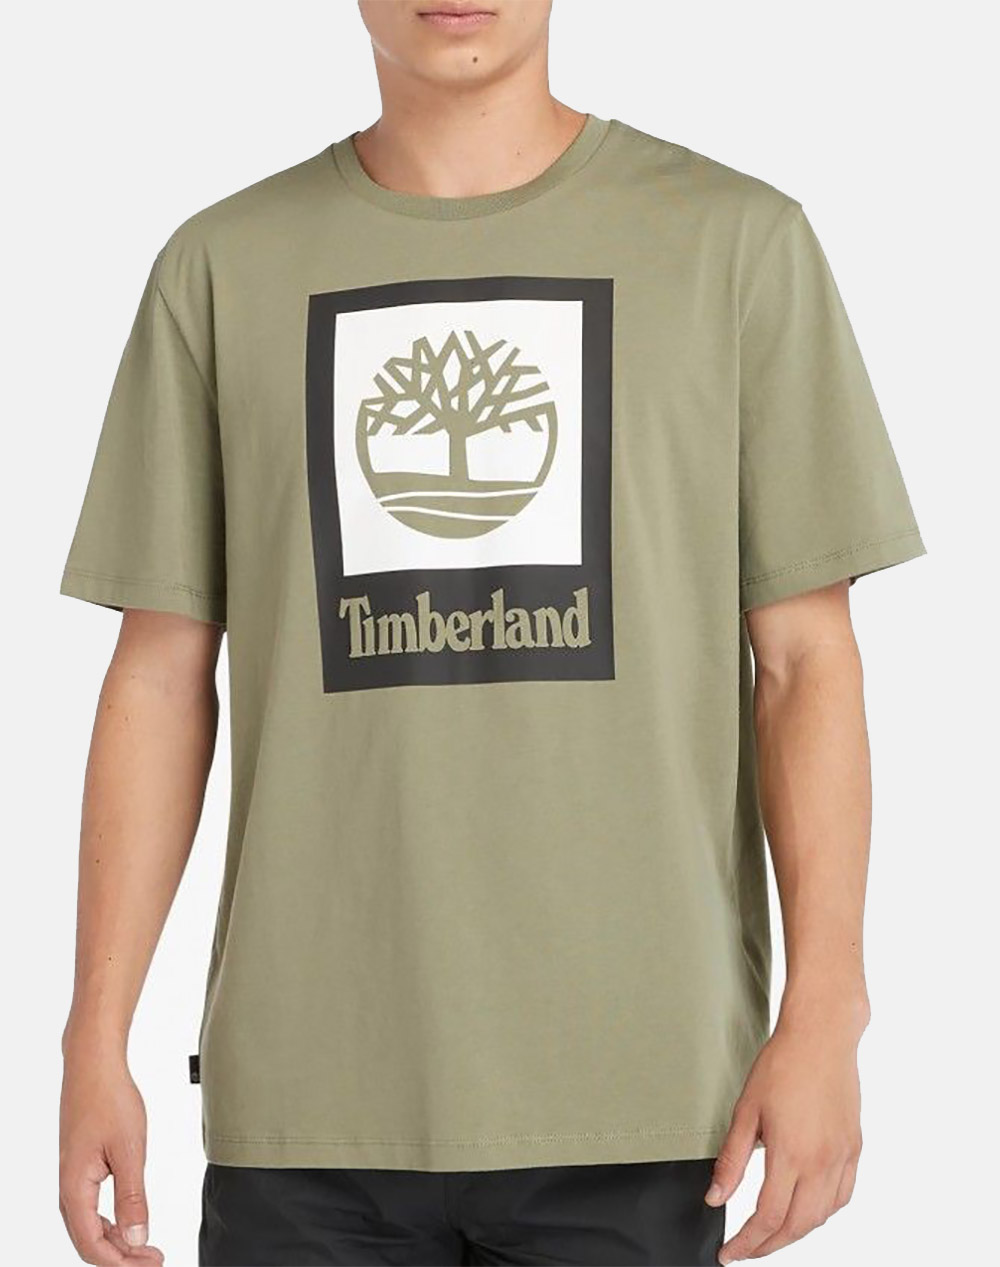 TIMBERLAND STLG Colored Short Sleeve Te TB0A5QS2-590 Olive 3820ATIMB3400113_XR21375